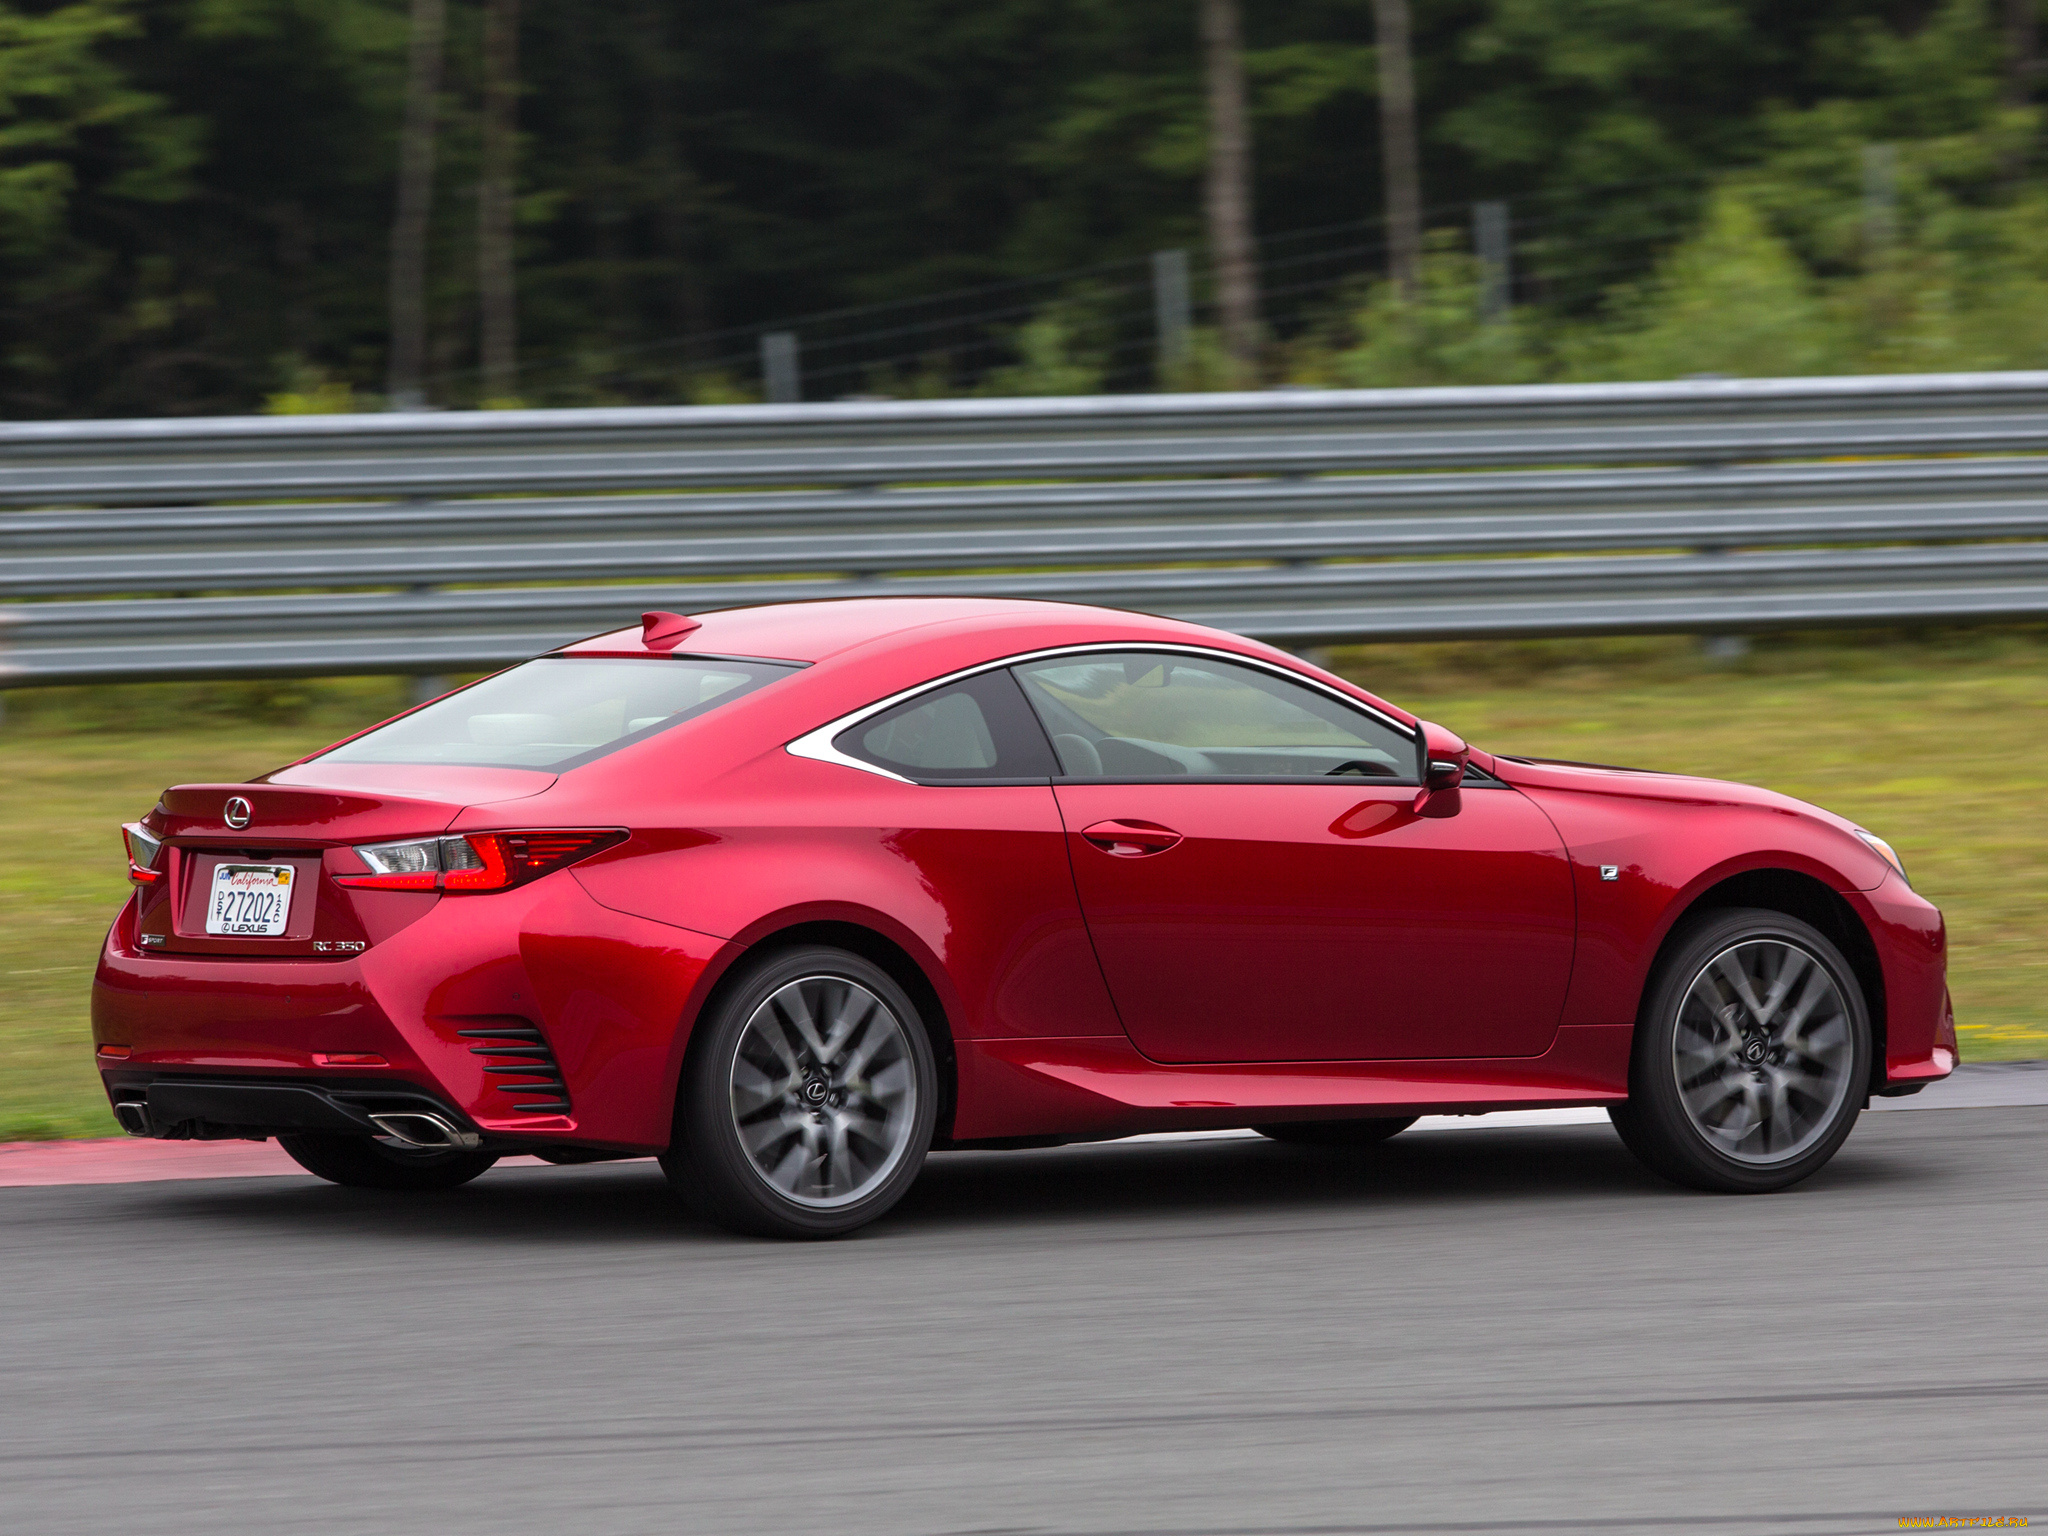 D f sport. Lexus RC 350. Lexus RC 350 F. Lexus RC 350 F Sport. Lexus RS 350.